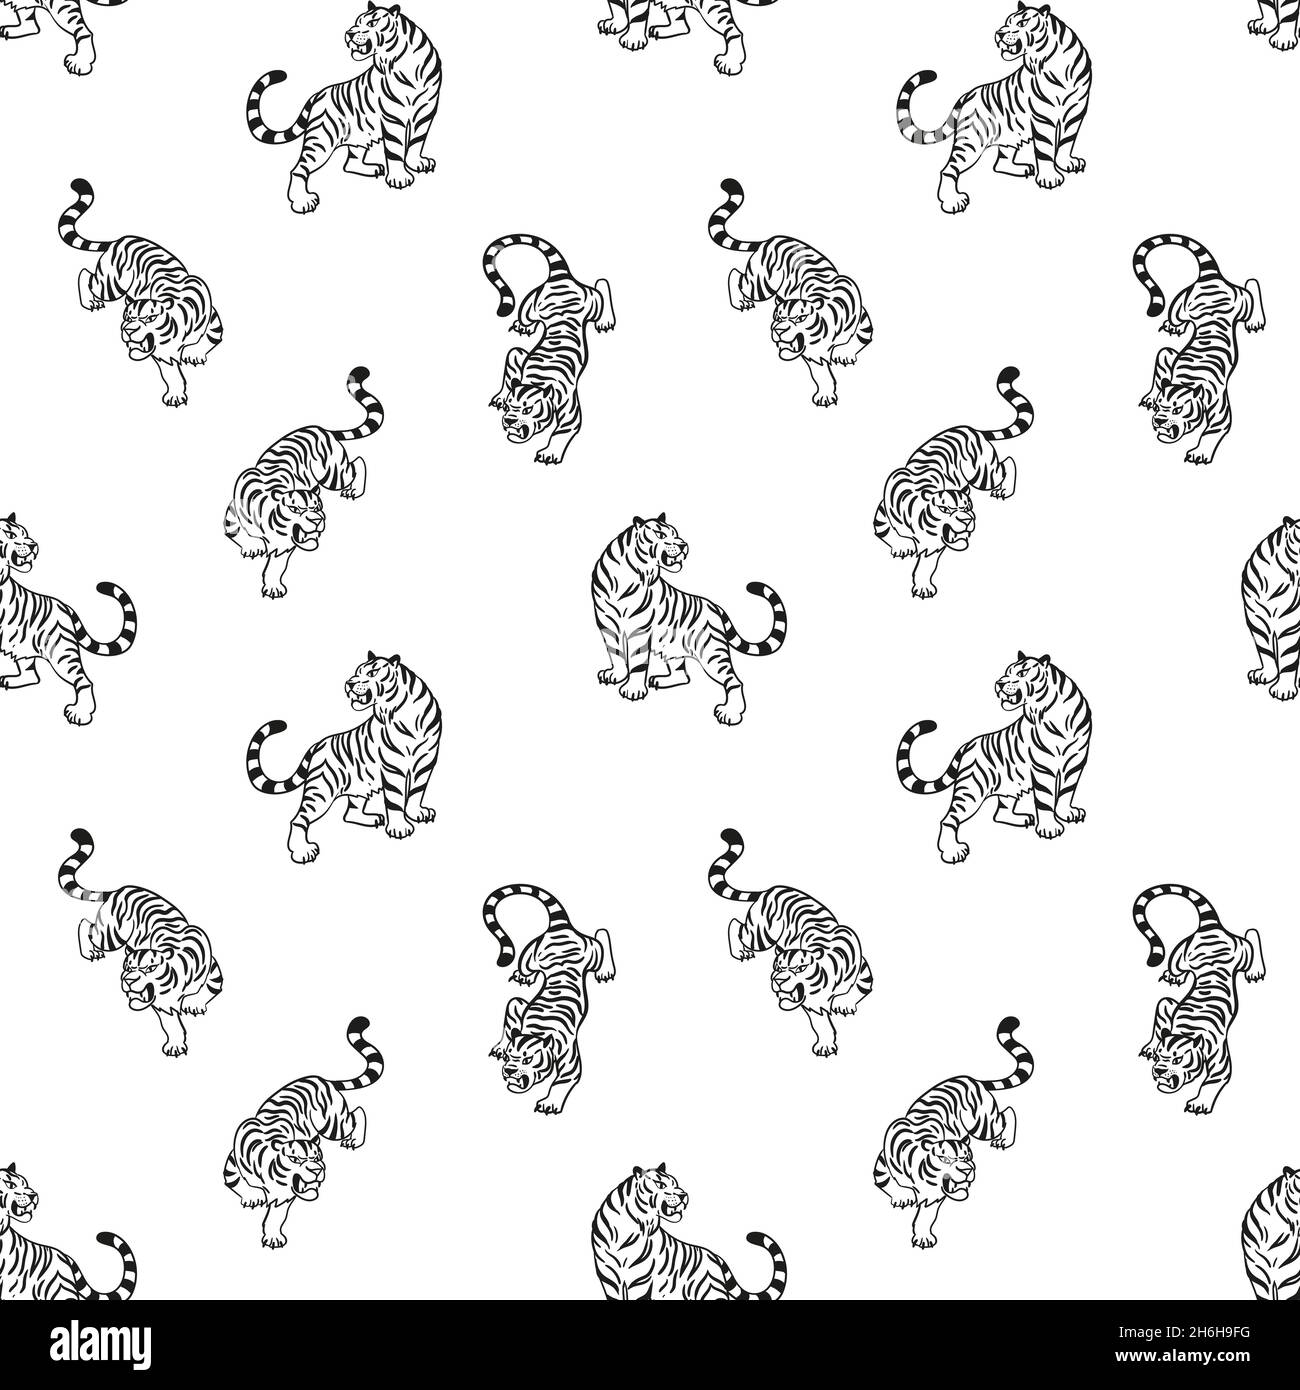 Seamless pattern with graphic tigers. Black and white predatory wild cats. Print for fabric, clothing, wrapping paper, wallpaper, textile Stock Vector